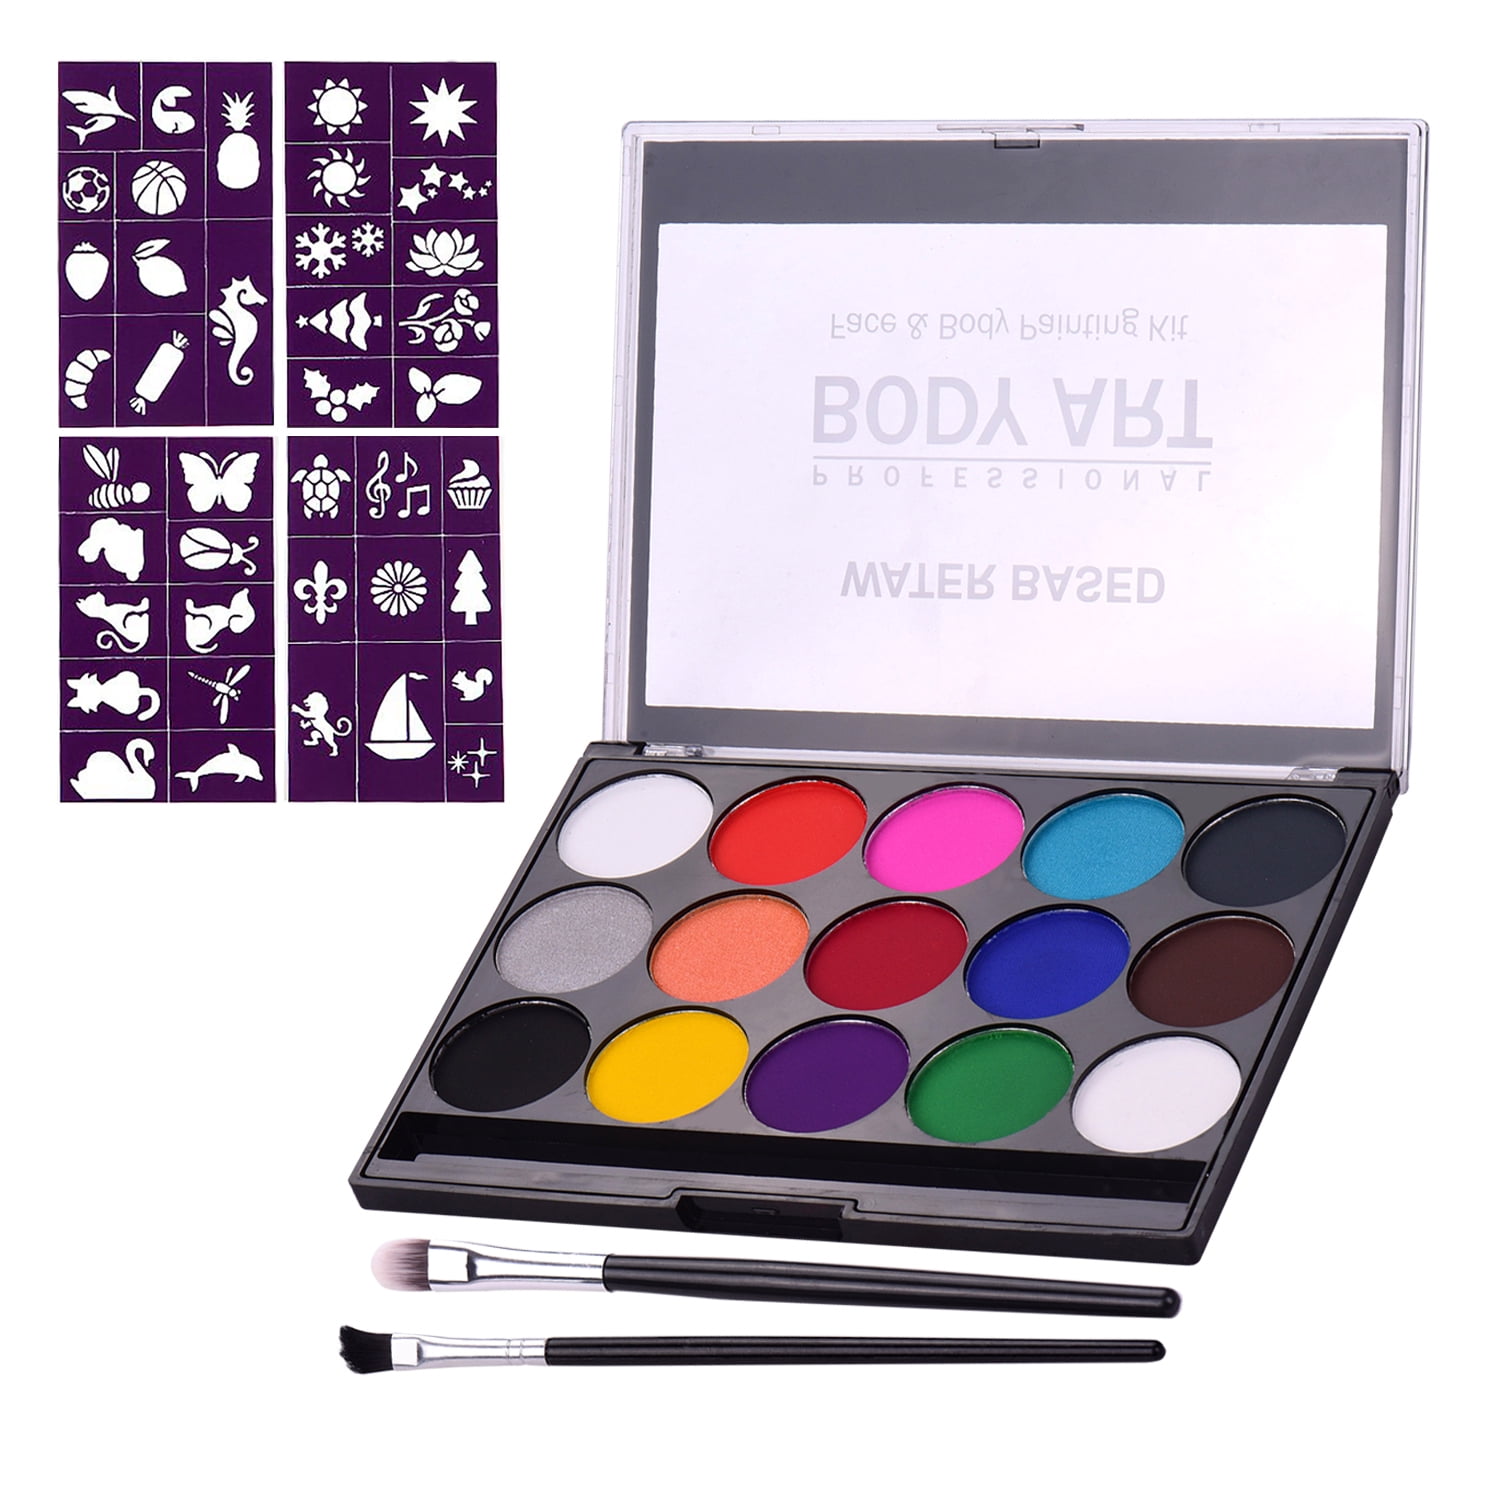 Professional Body Art Face Painting Kit Water Based Removable Paints 15 Colors Palette with 2 Paintbrushes and 4 Templates for Costume Makeup Themed